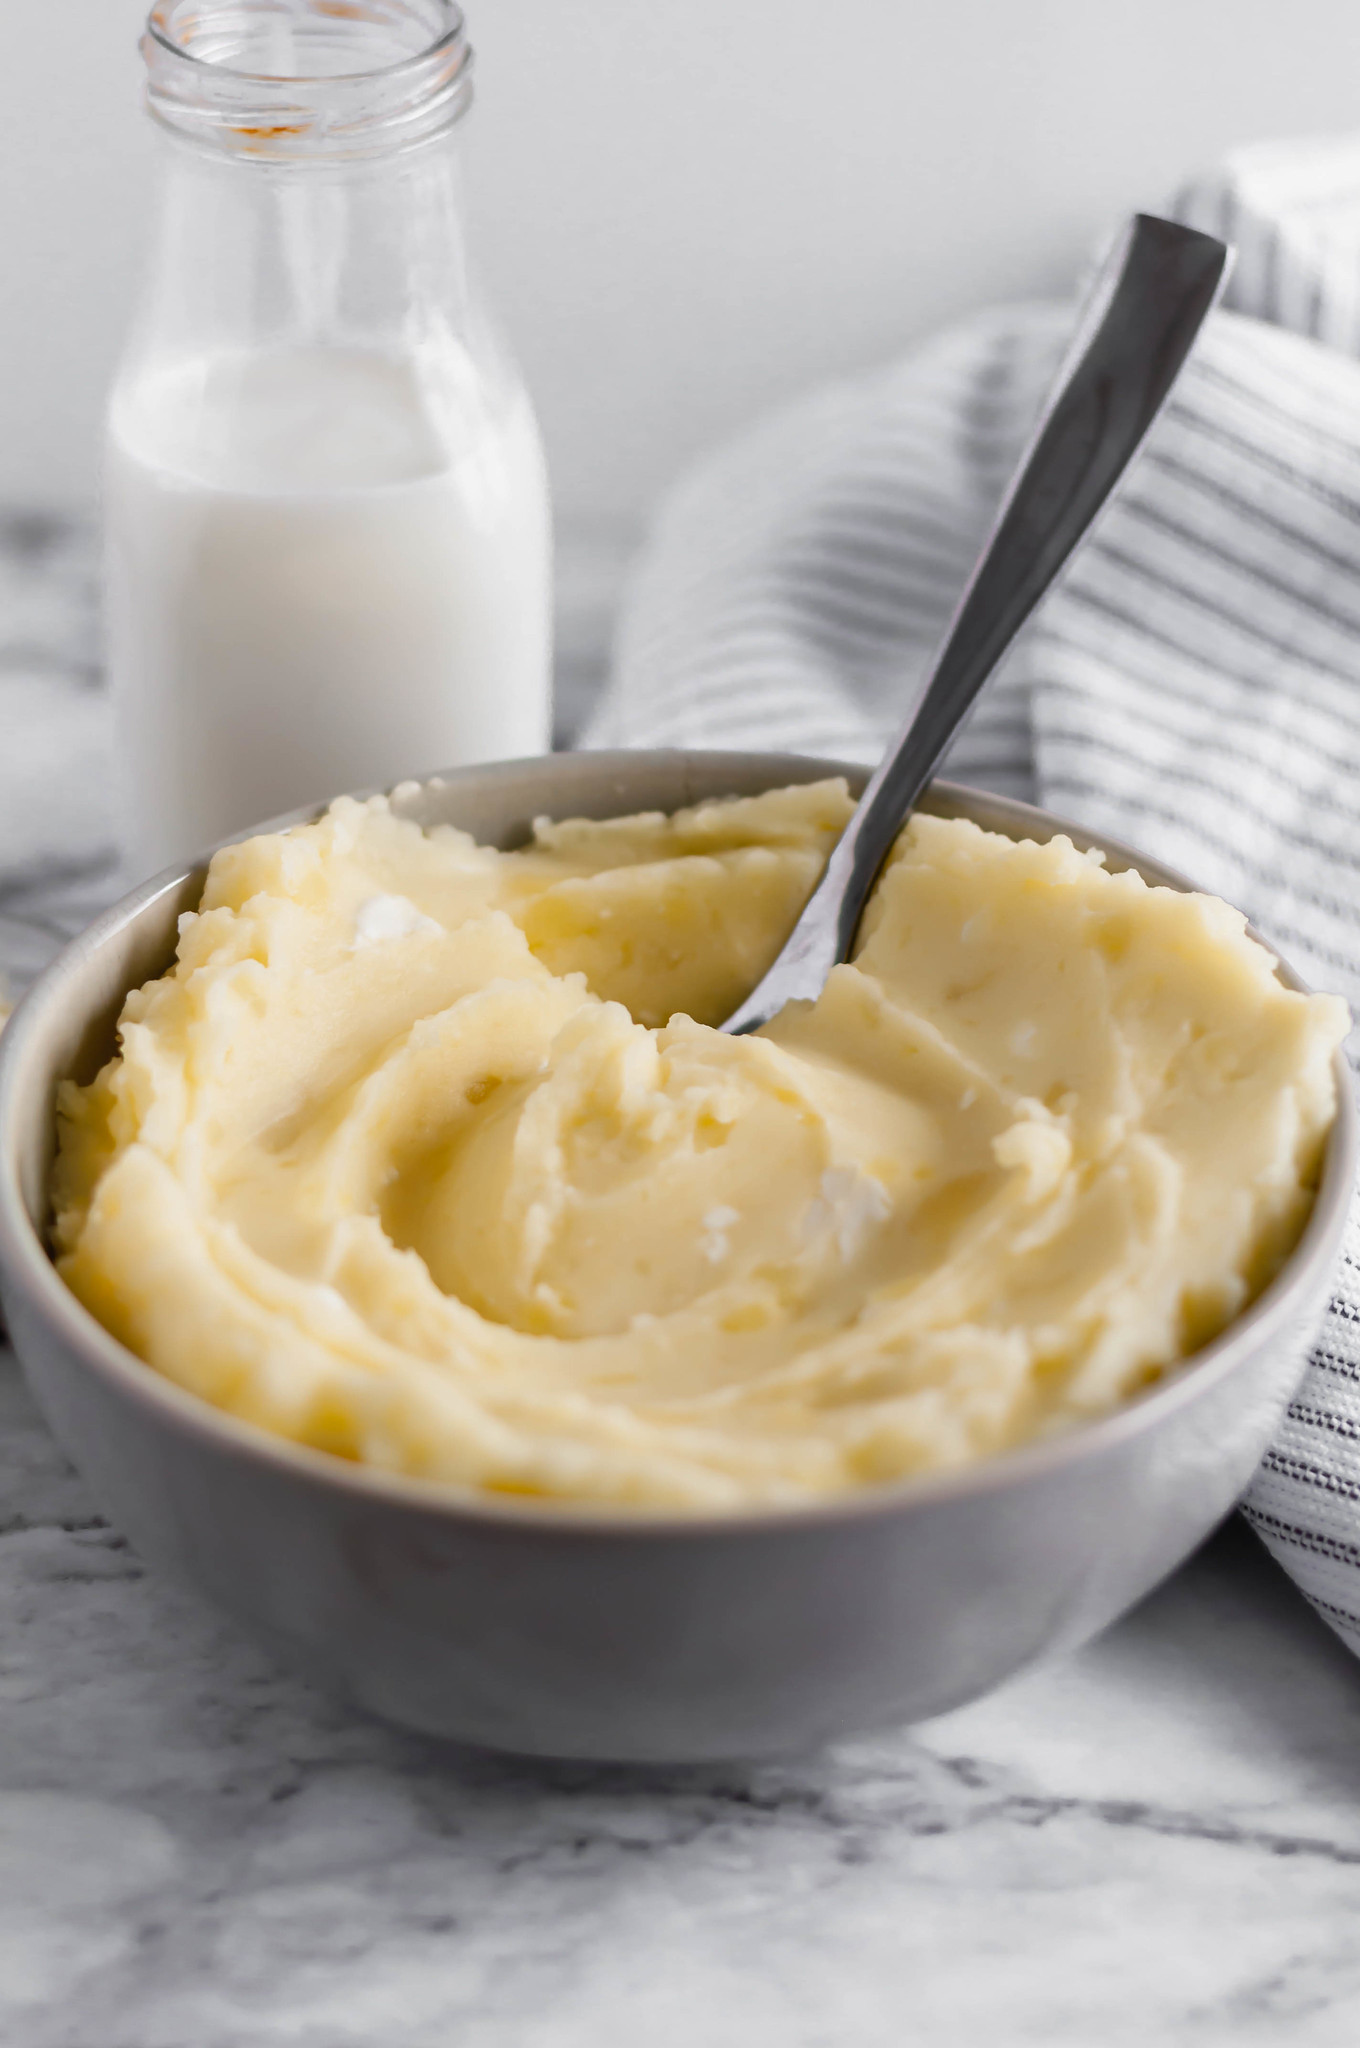 The holidays are right around the corner. These Buttermilk Mashed Potatoes are the perfect addition to your holiday table. Super creamy, a little tangy and totally delicious.